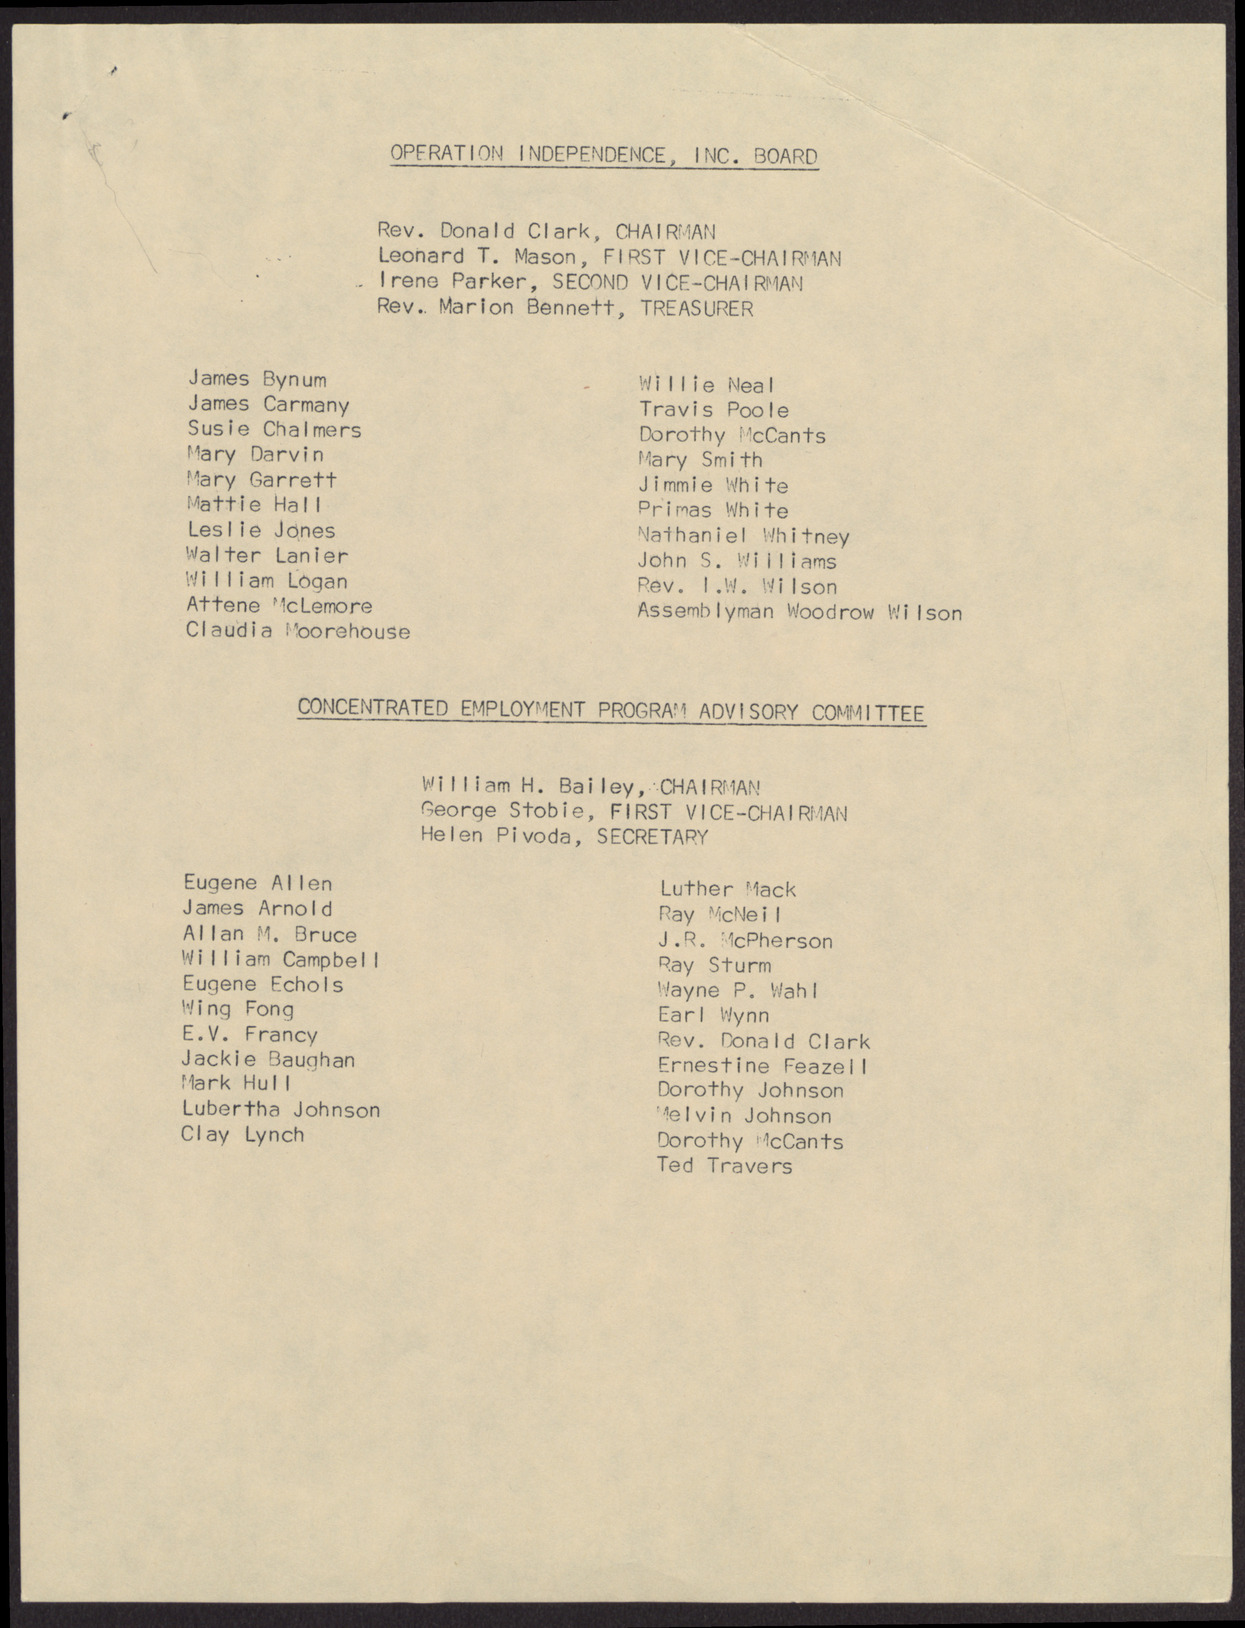 List of Operation Independence Members (3 pages), no date